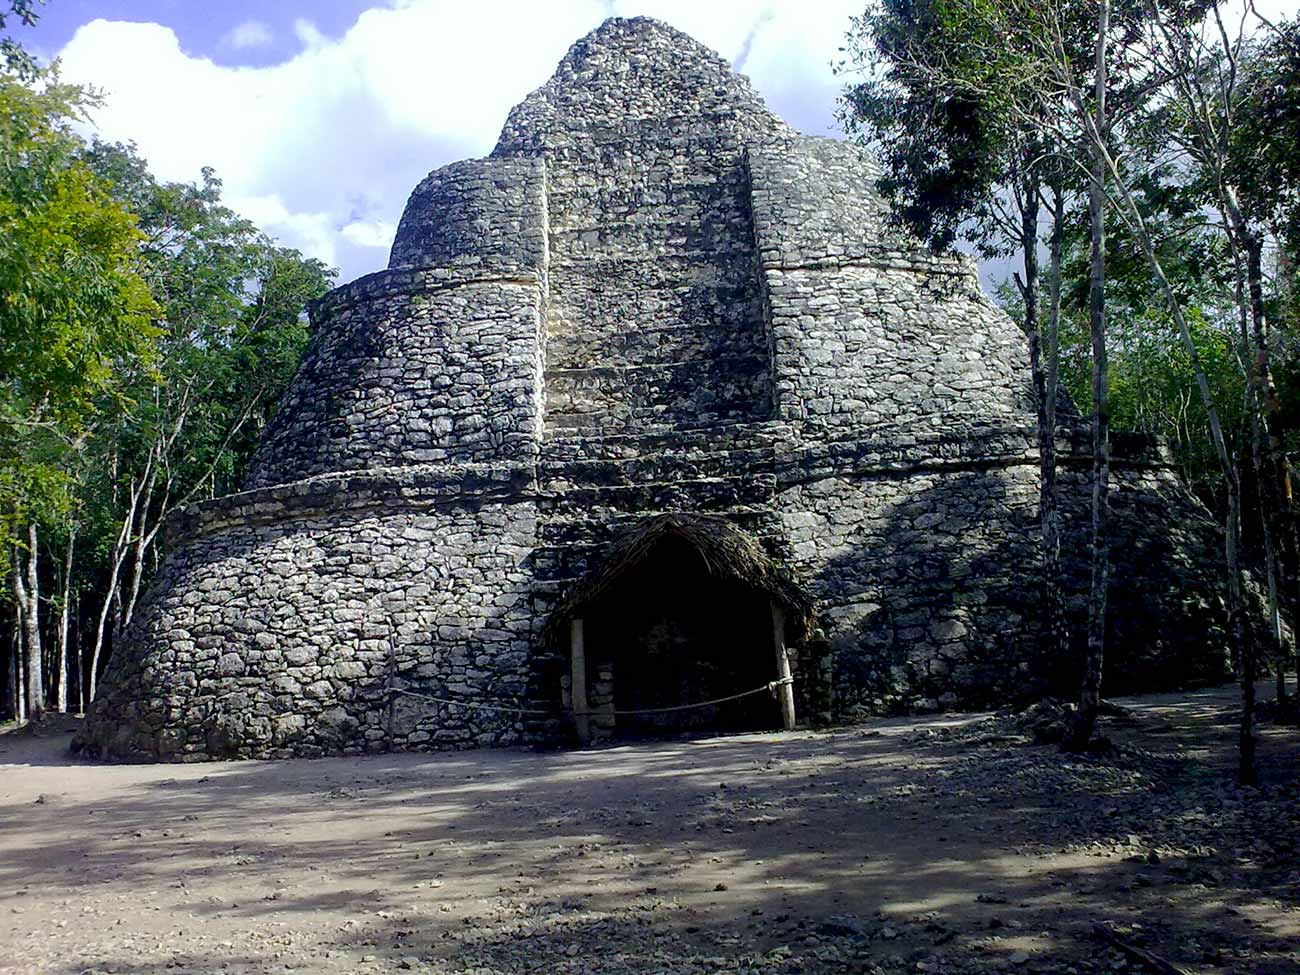 Tour G. Coba and Cenote Tamcach ha & Mayan Village | Group Discount Rate $155.US dollars per person